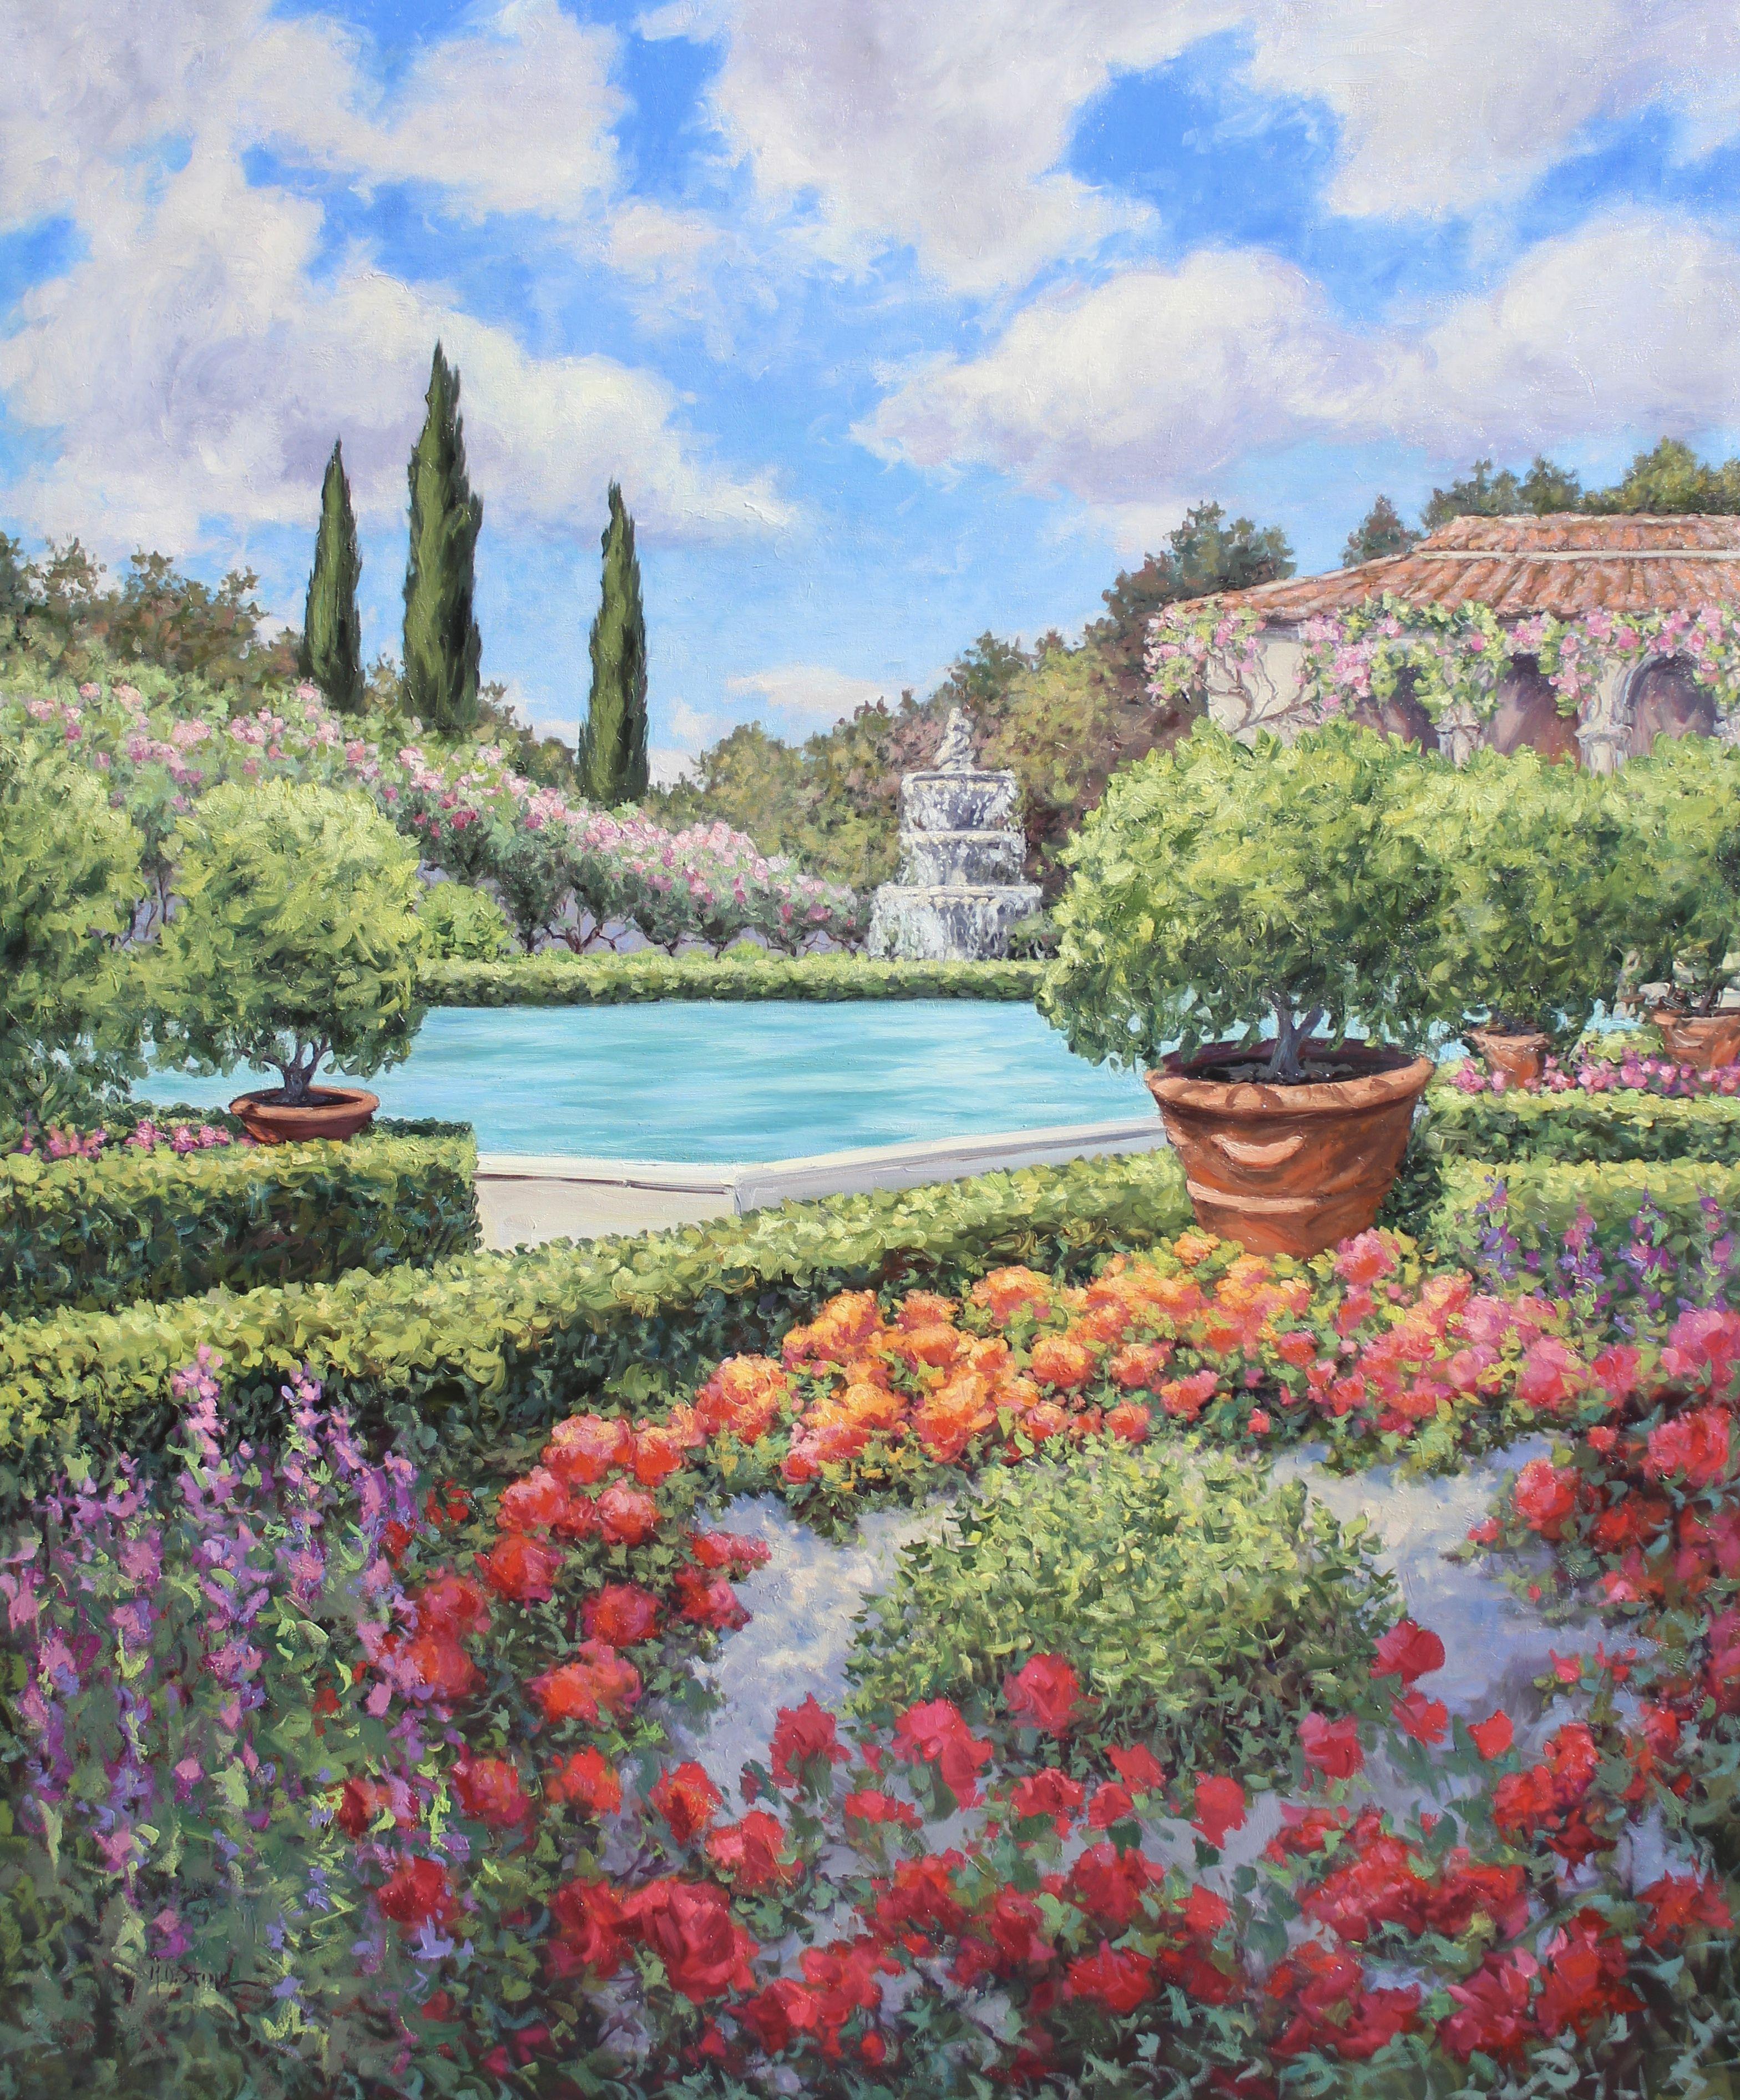 An original oil painting of a beautiful Italian Garden. This is a large painting, 60" tall by 50" wide (152.4 x 127 cm). Standing in front of it makes you feel as if you are there. Hanging this artwork on the wall of your home will elevate your room